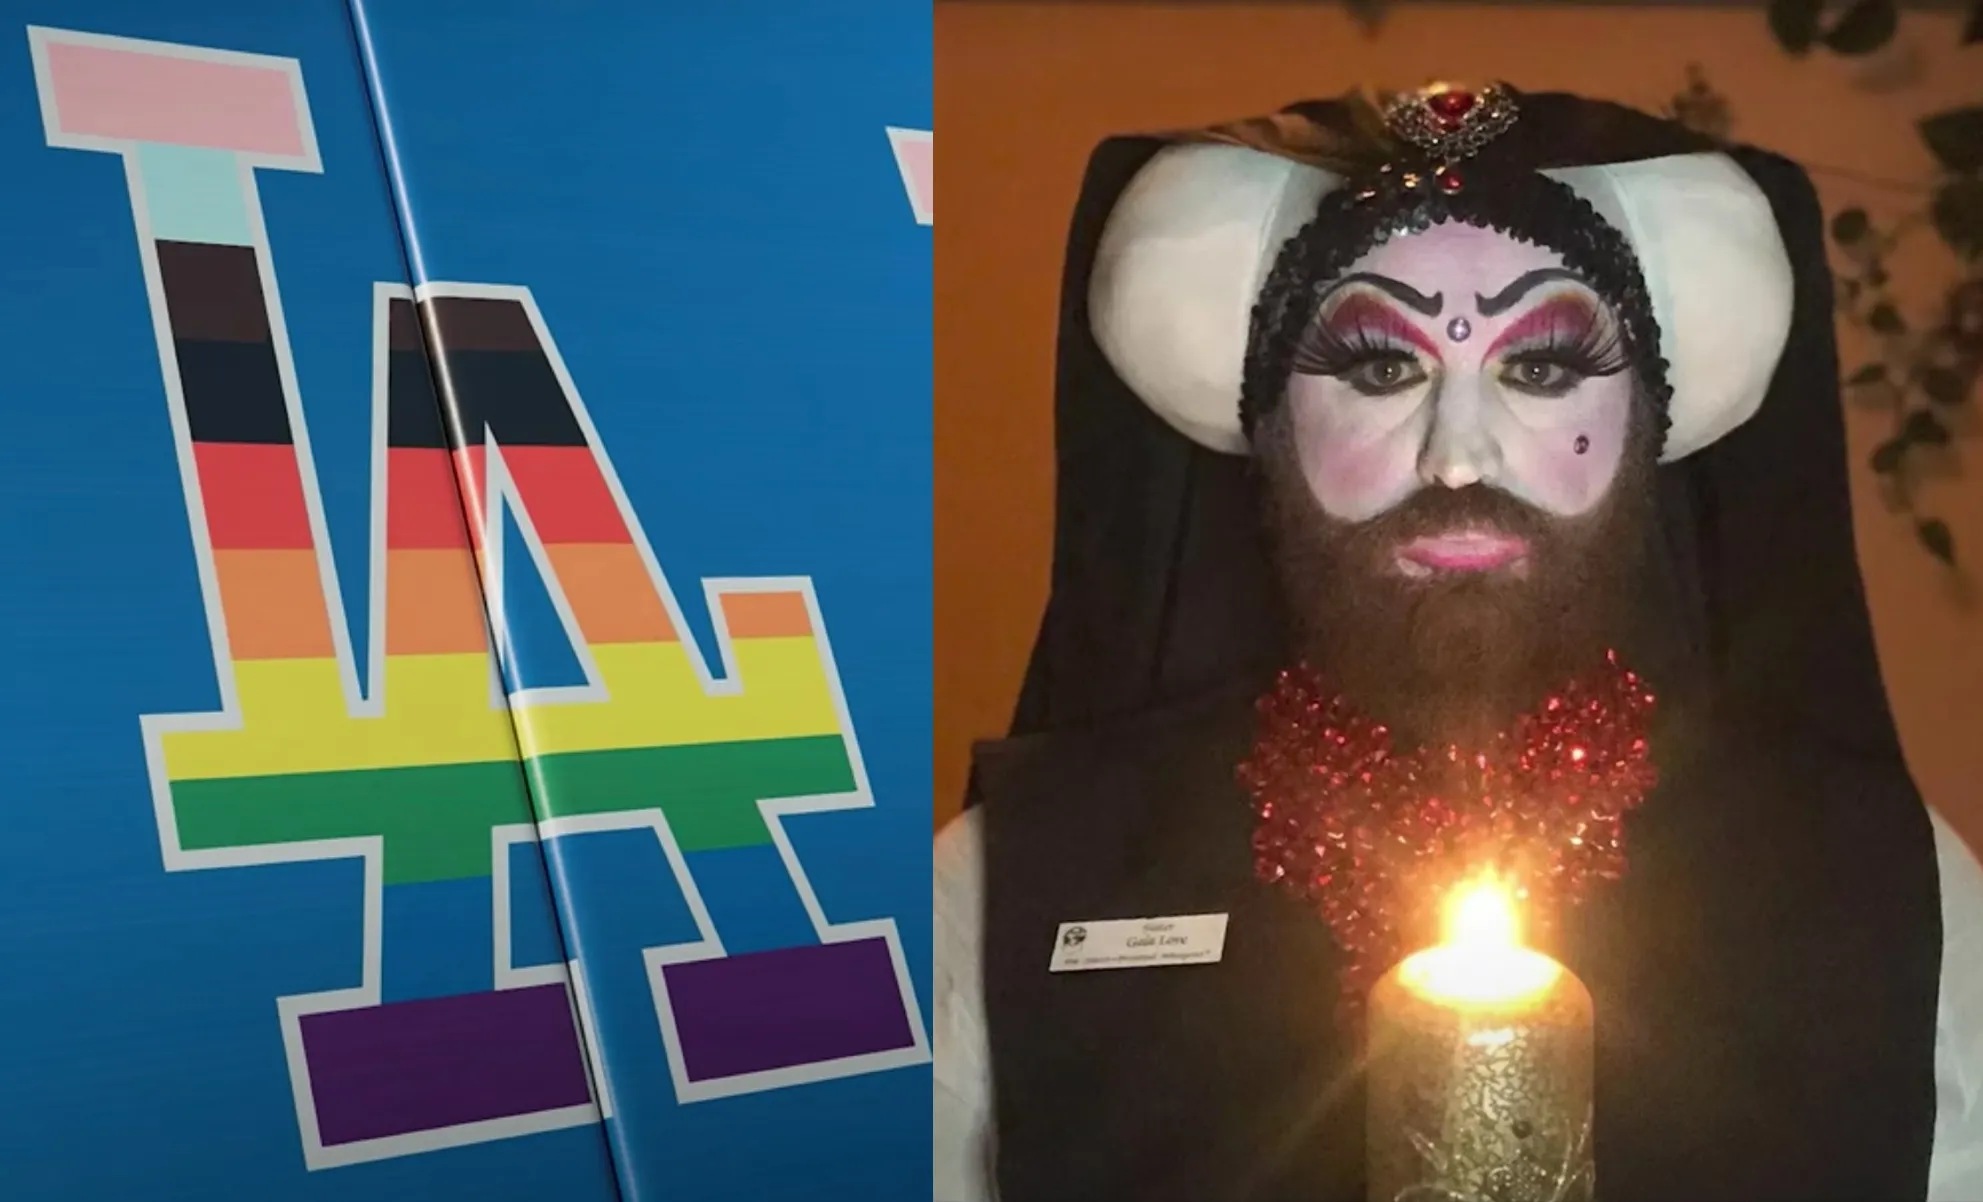 Dodgers Re-Invite Sisters of Perpetual Indulgence to Pride Night